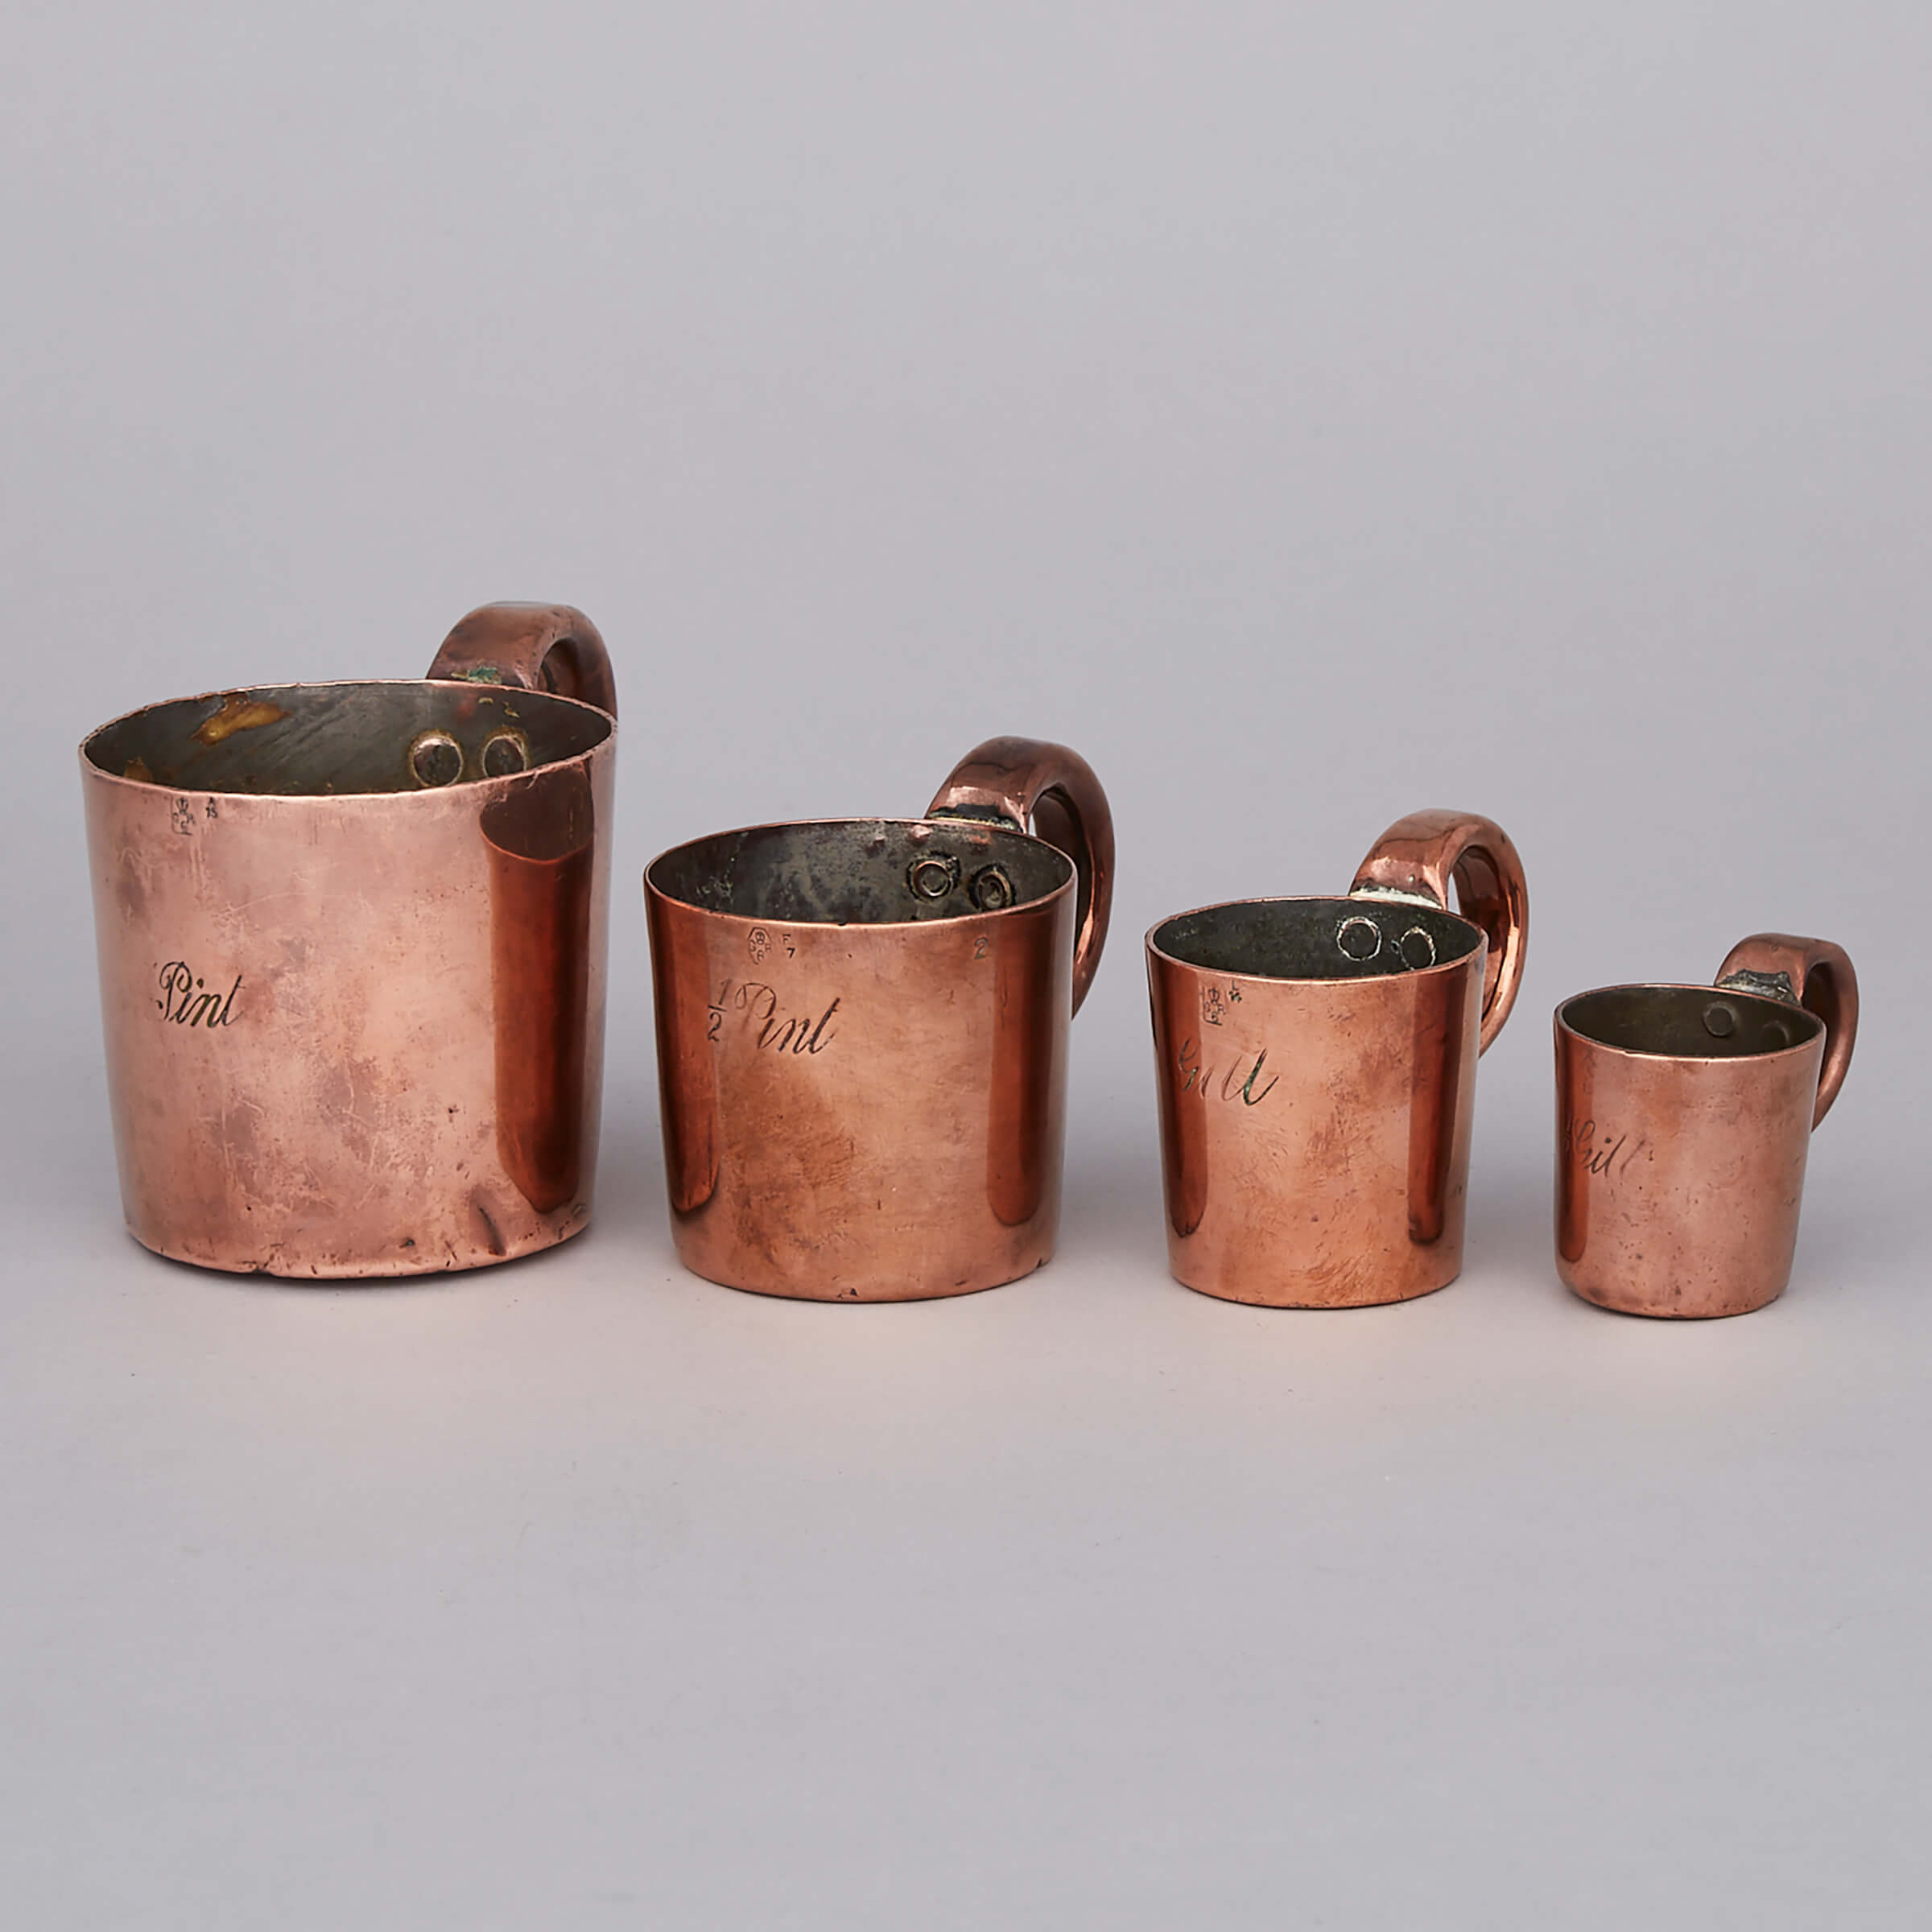 Set of Four Royal Navy Graduated Copper Rum Measures, early 19th century